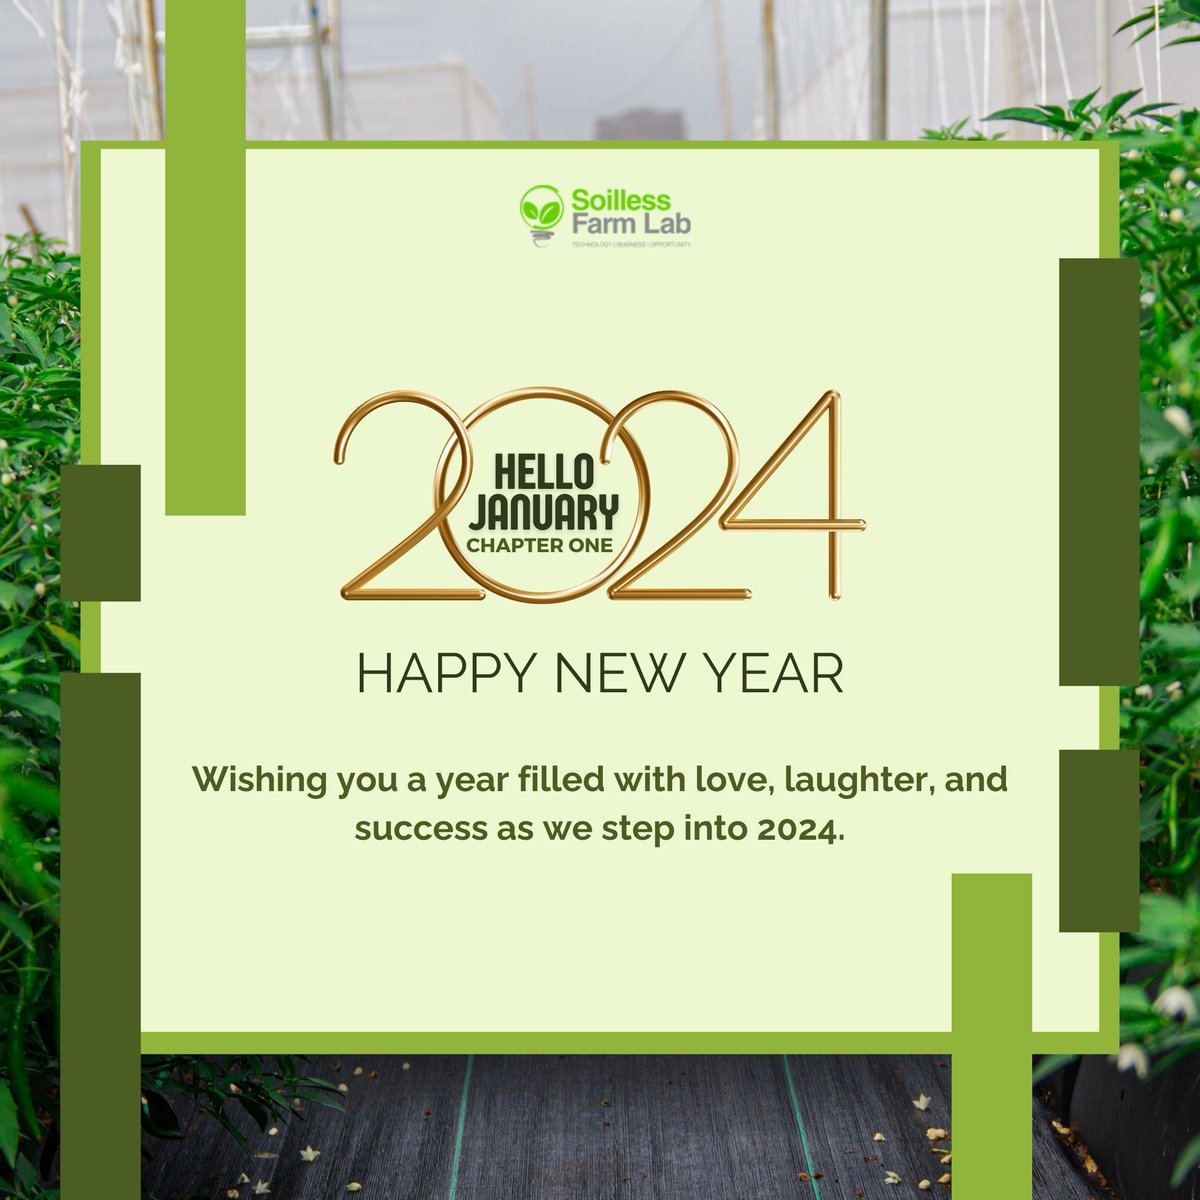 Embrace the fresh start, and let the spirit of new beginnings inspire you to reach new heights.

#EYiA #foodheroes #foodsecurity #foodsustainability #zerohunger